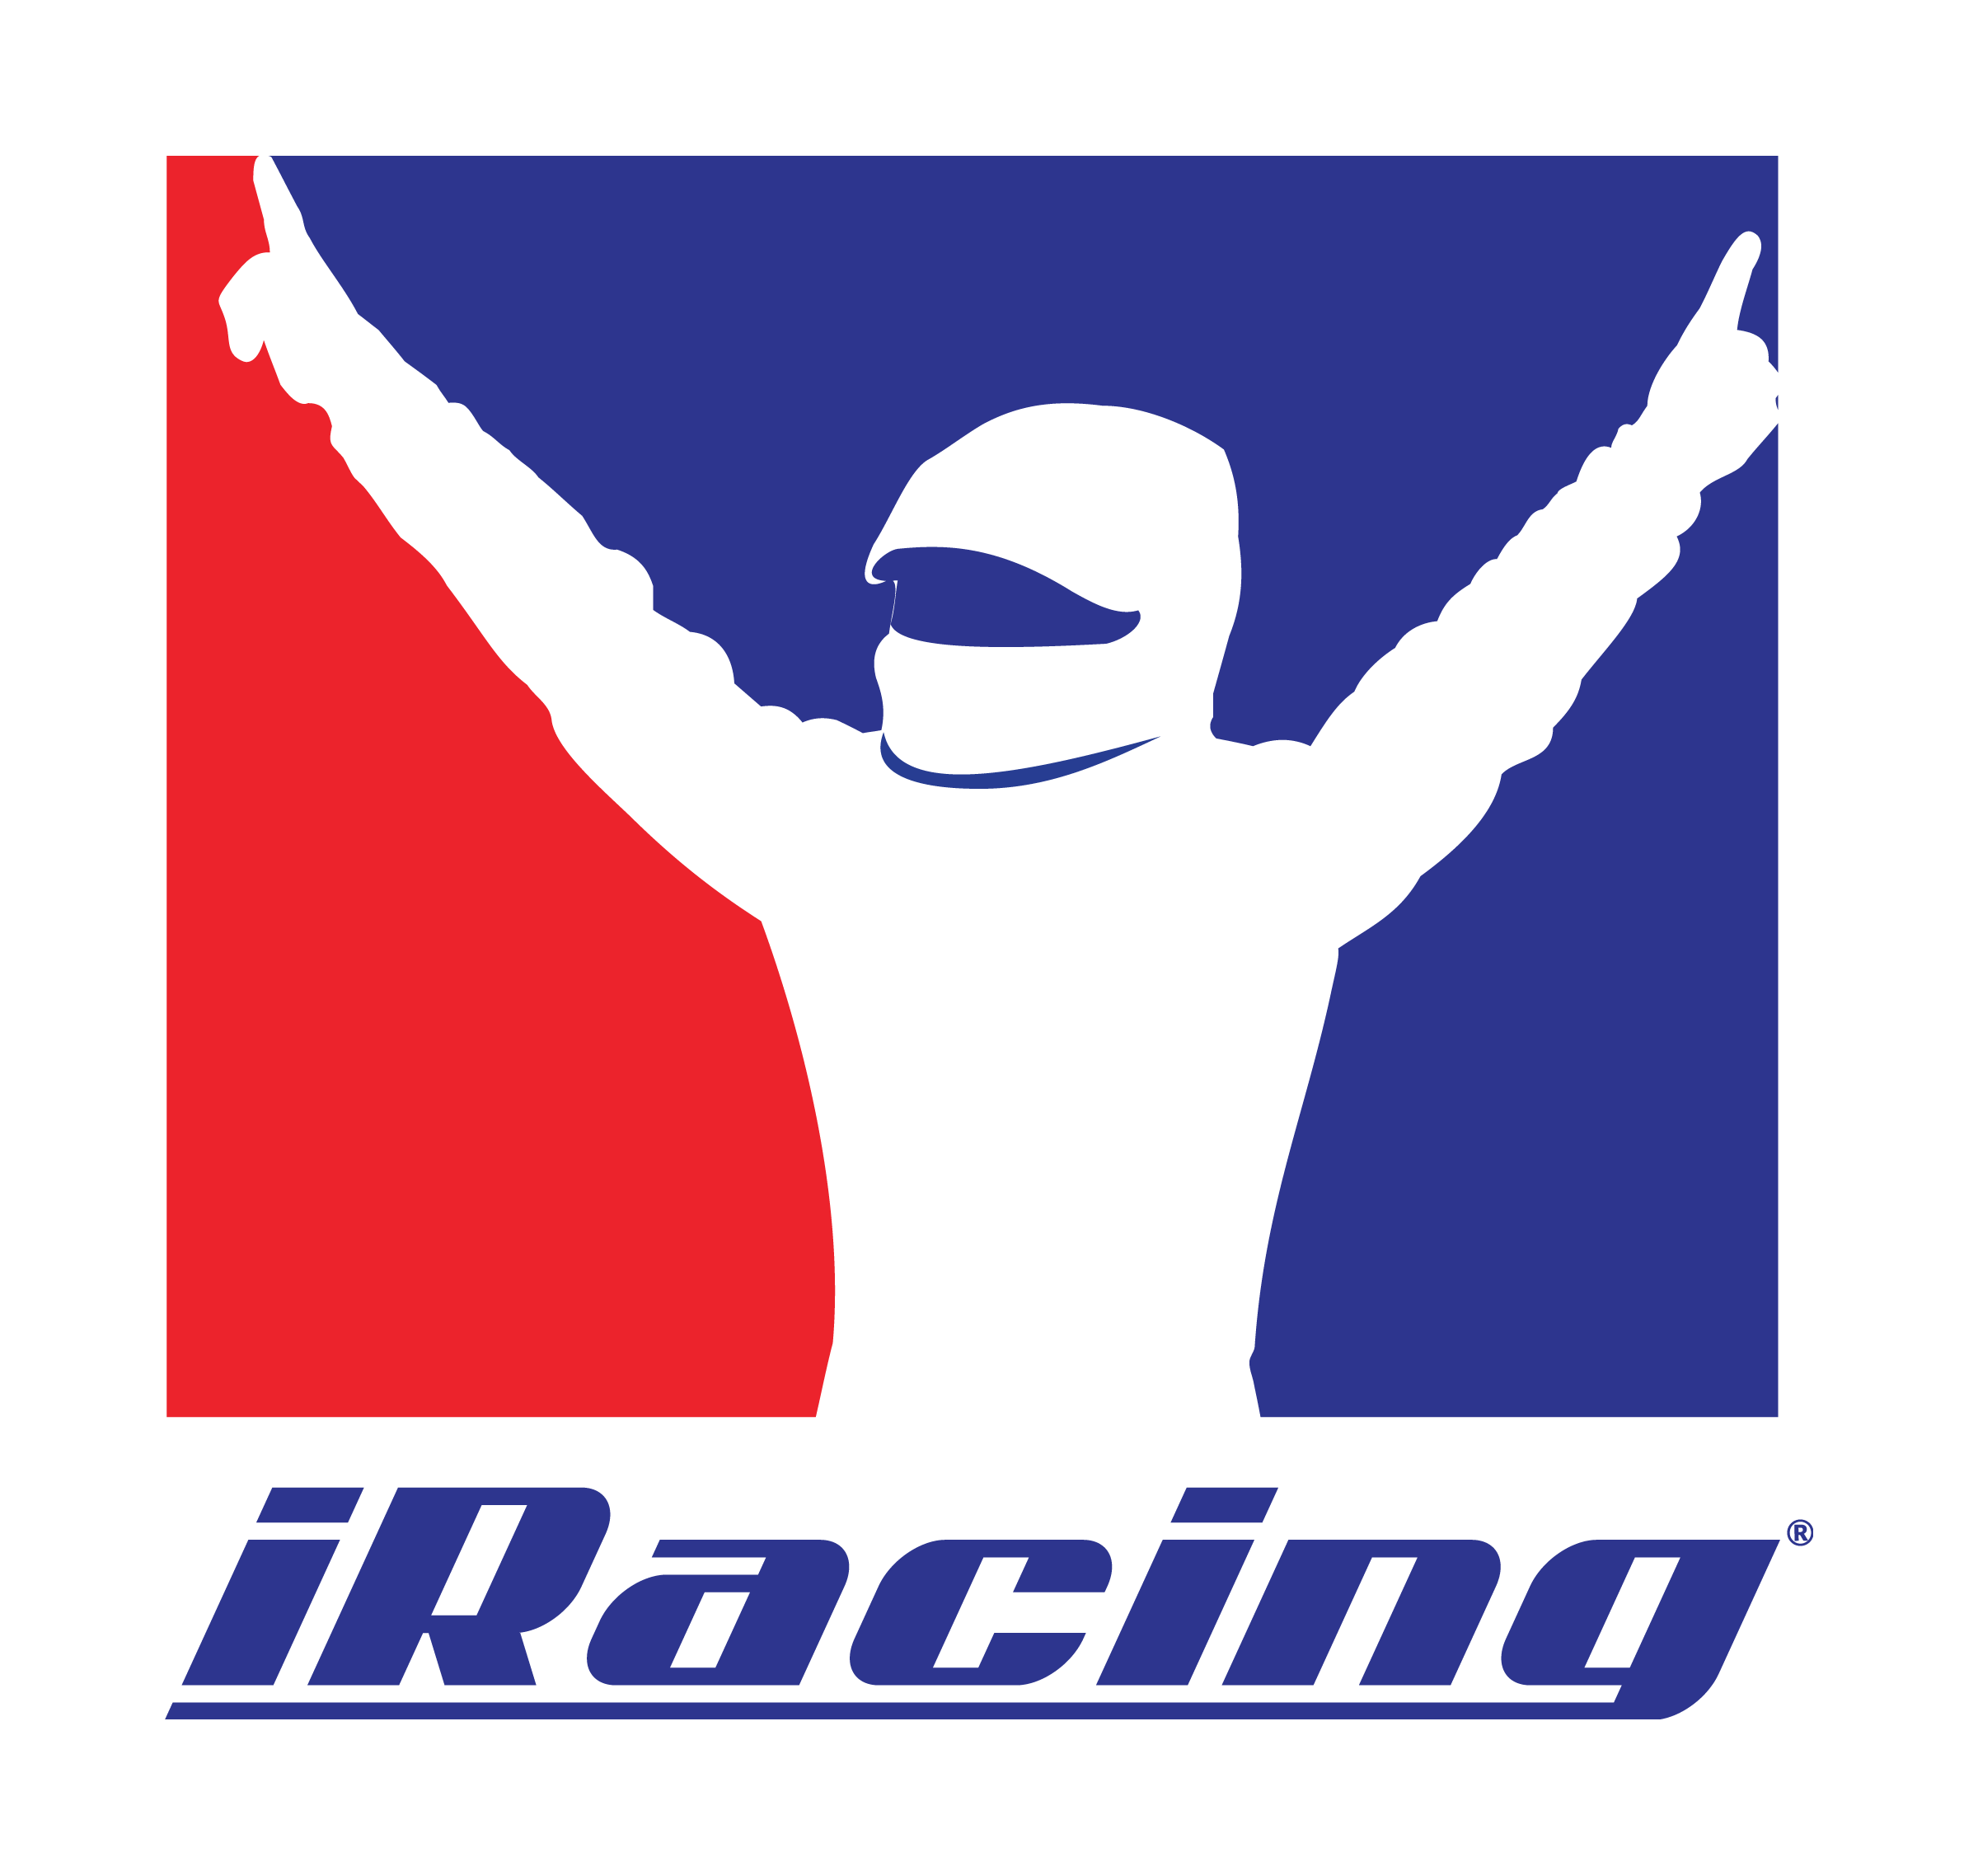 Red and Blue Square Logo - IRacing Logo Blue Square R_canv120 • Heusinkveld